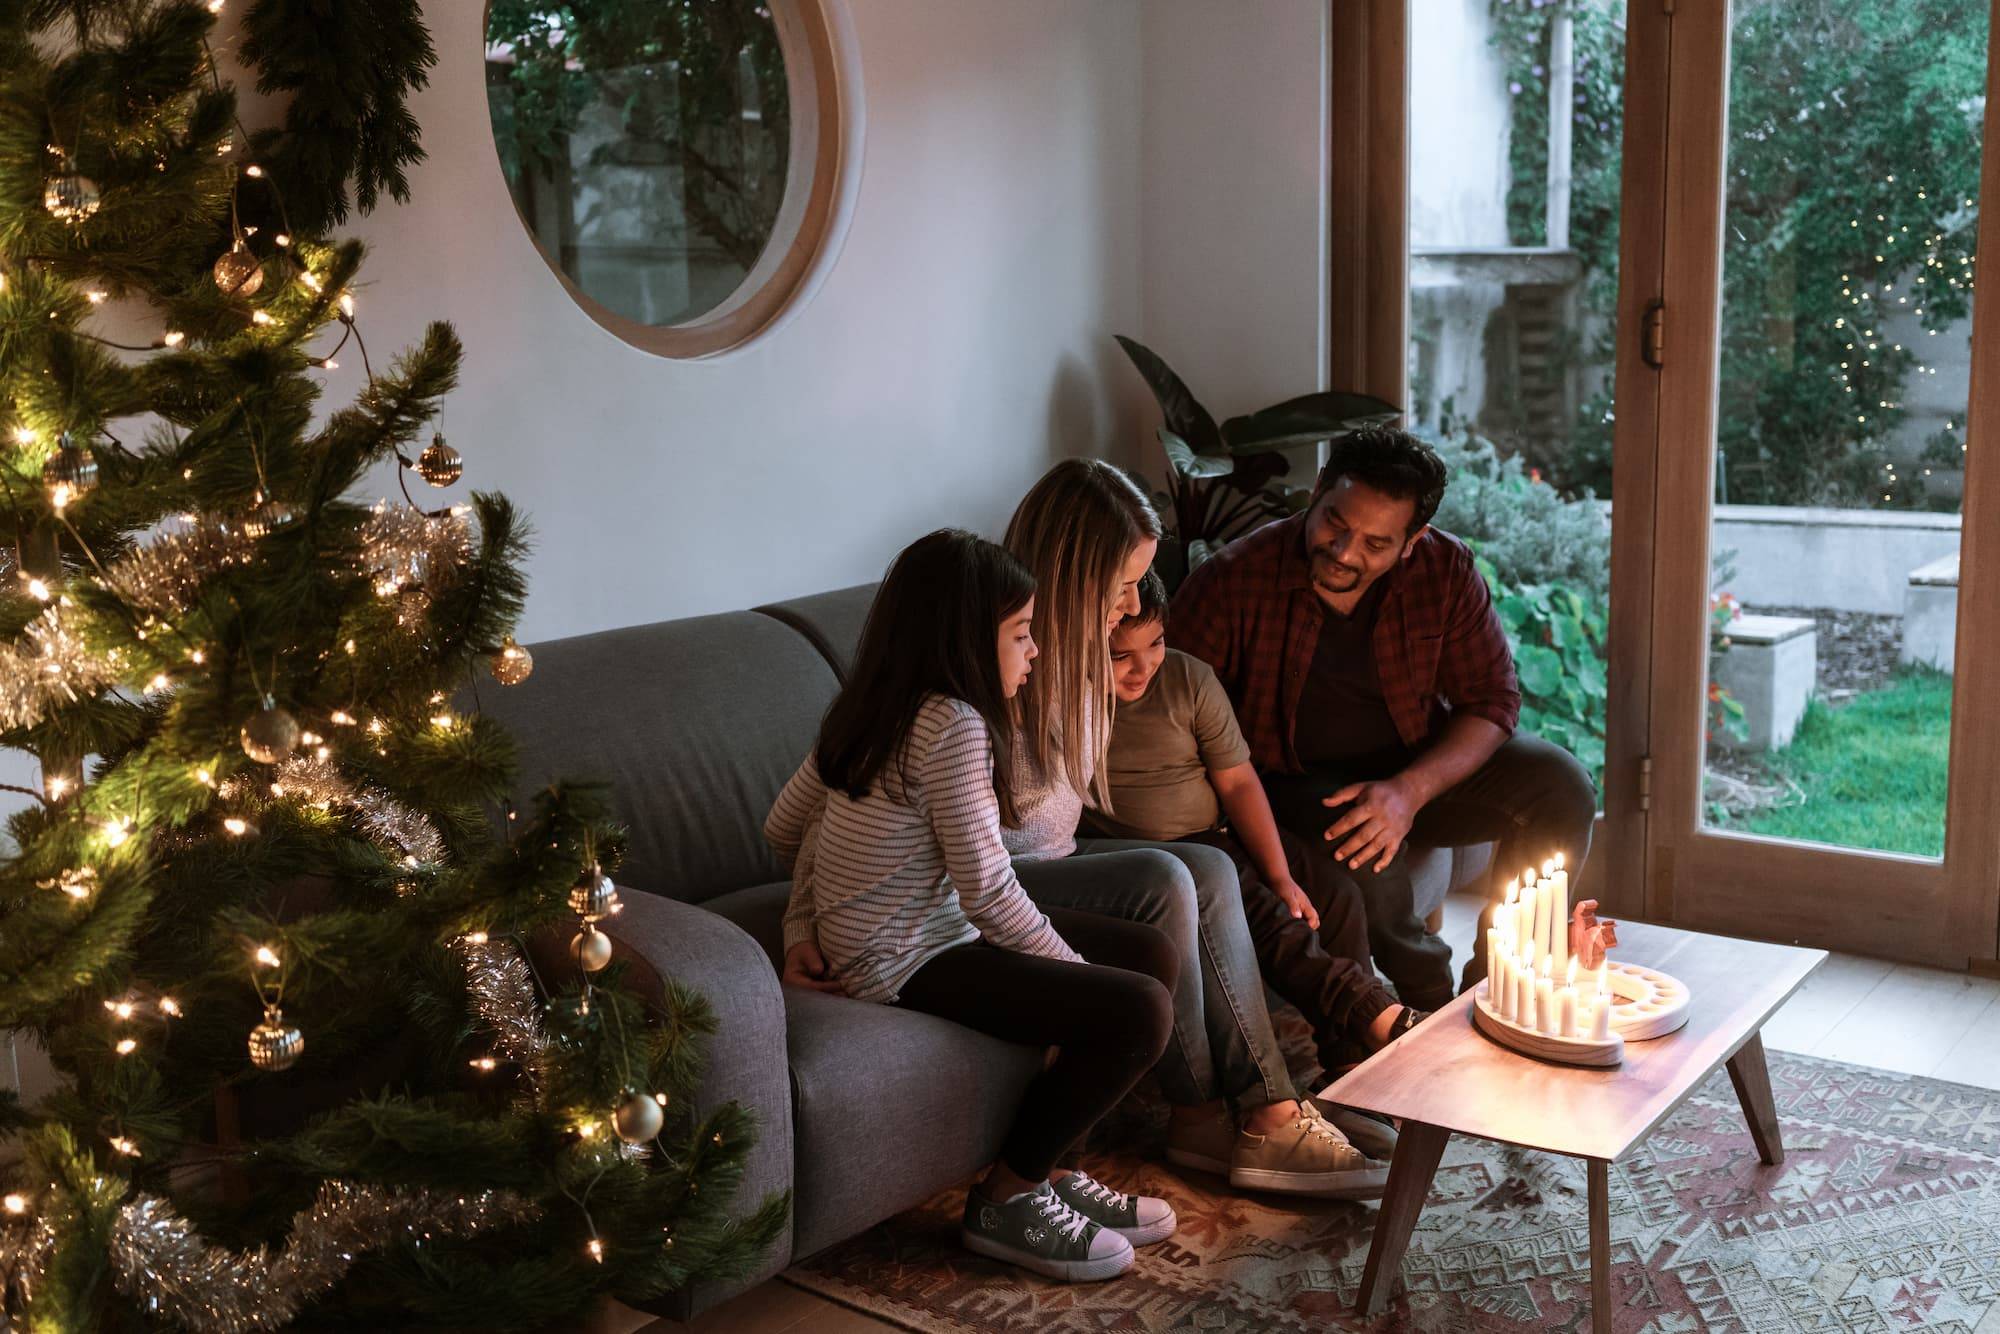 A family light advent candles together and learn about the meaning of Christmas